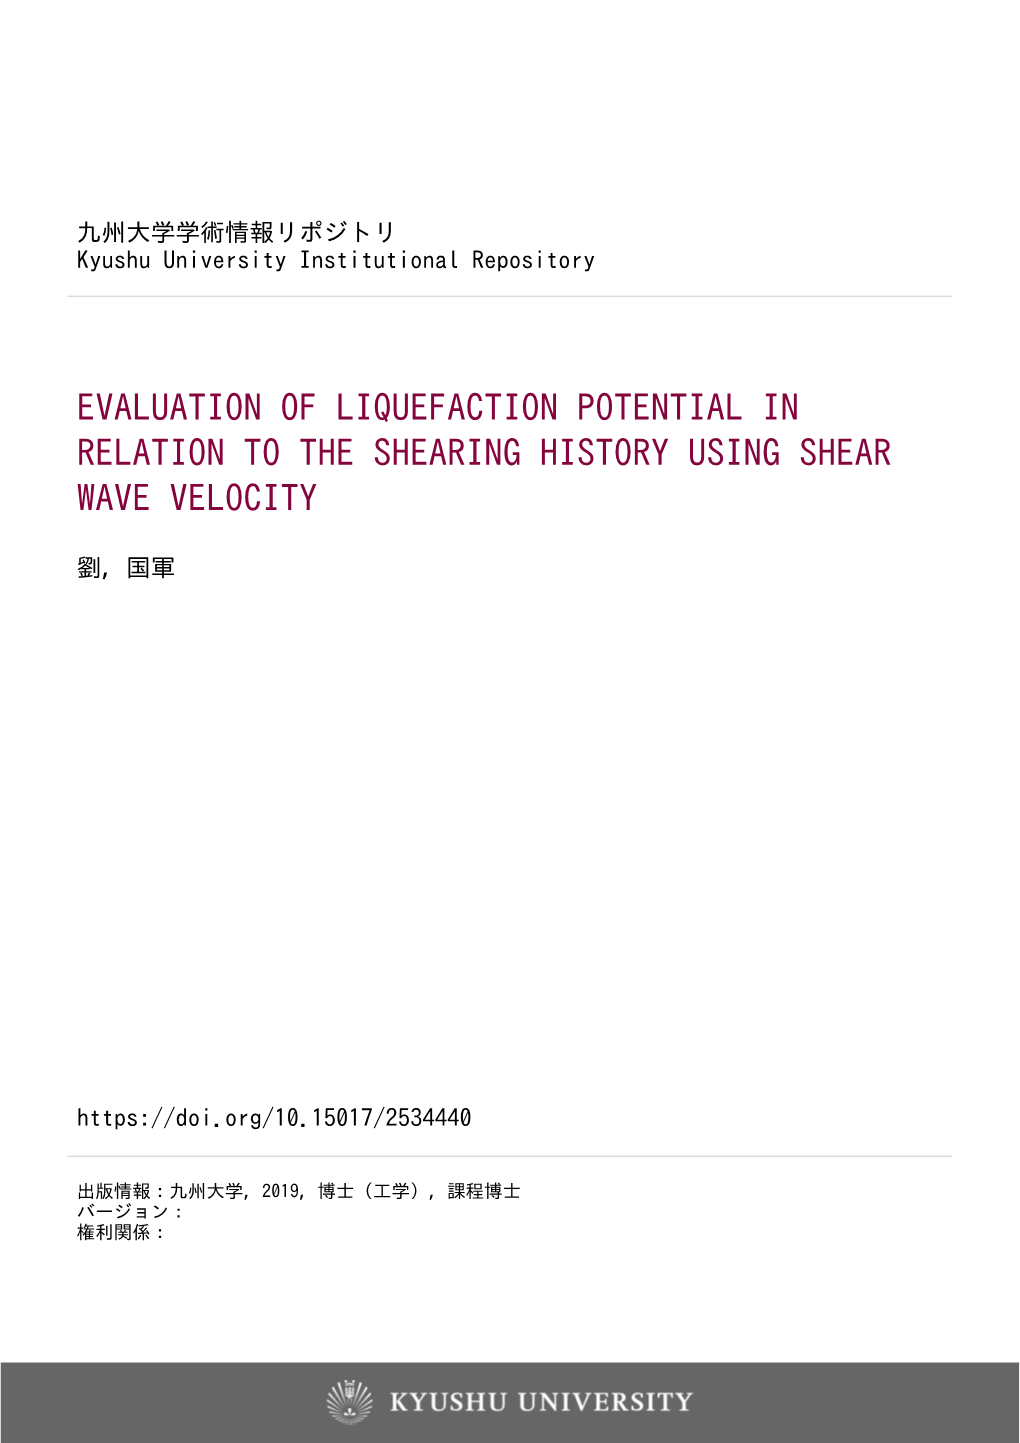 Evaluation of Liquefaction Potential in Relation to the Shearing History Using Shear Wave Velocity